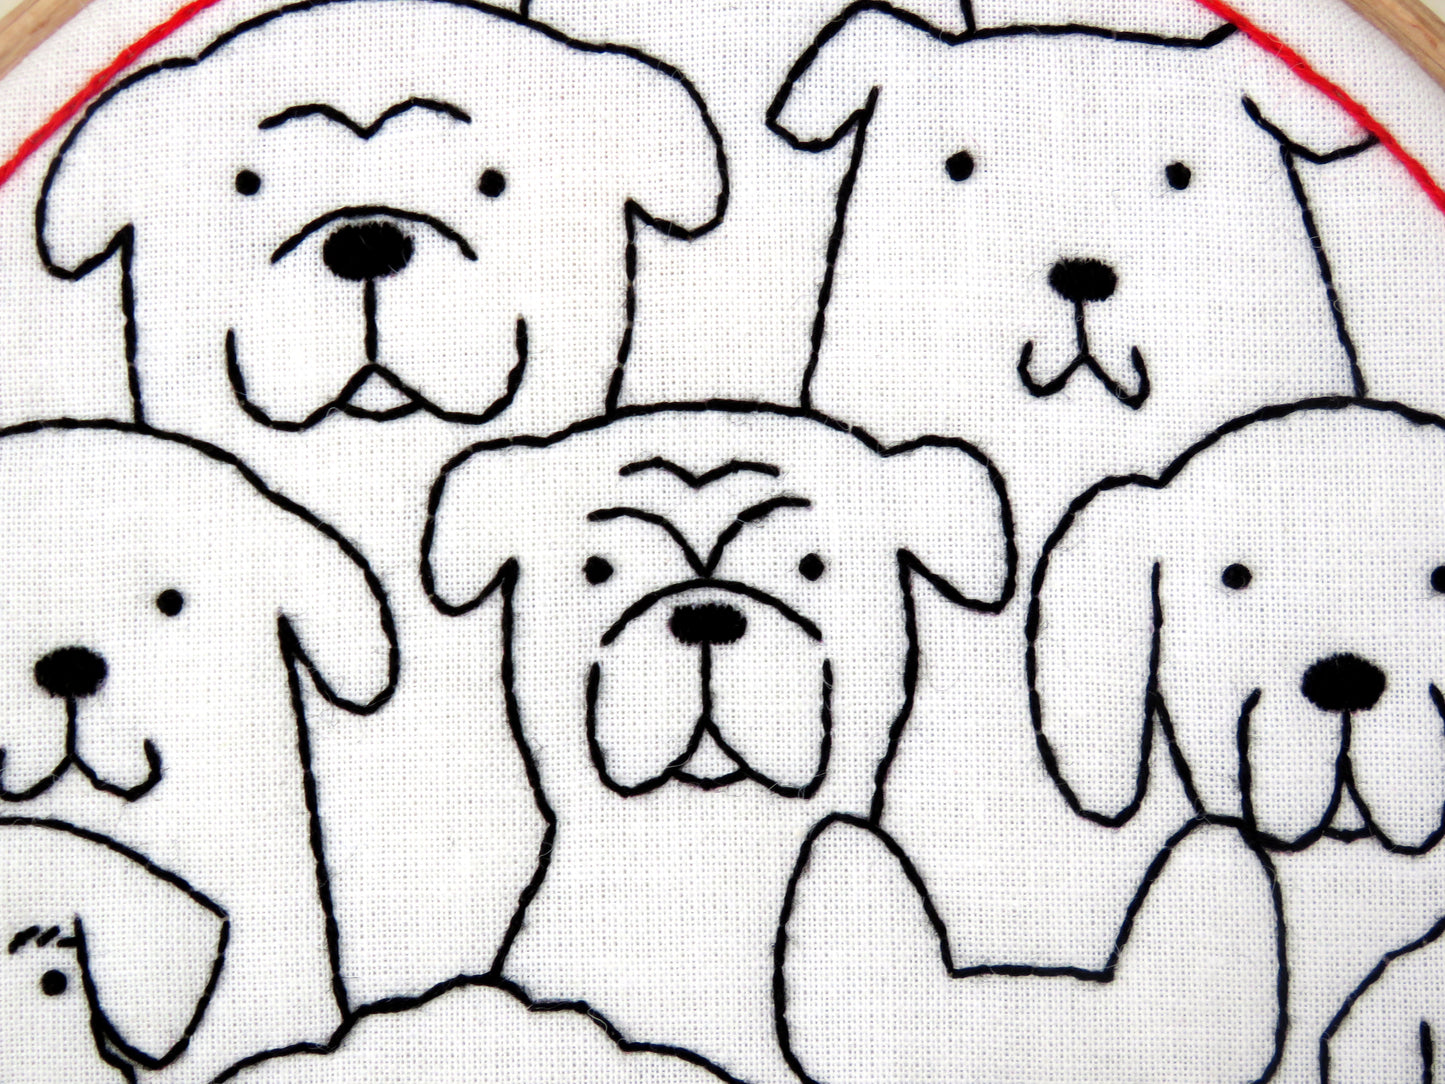 Dogs Embroidery Kit - Embroidery Kits - ohsewbootiful